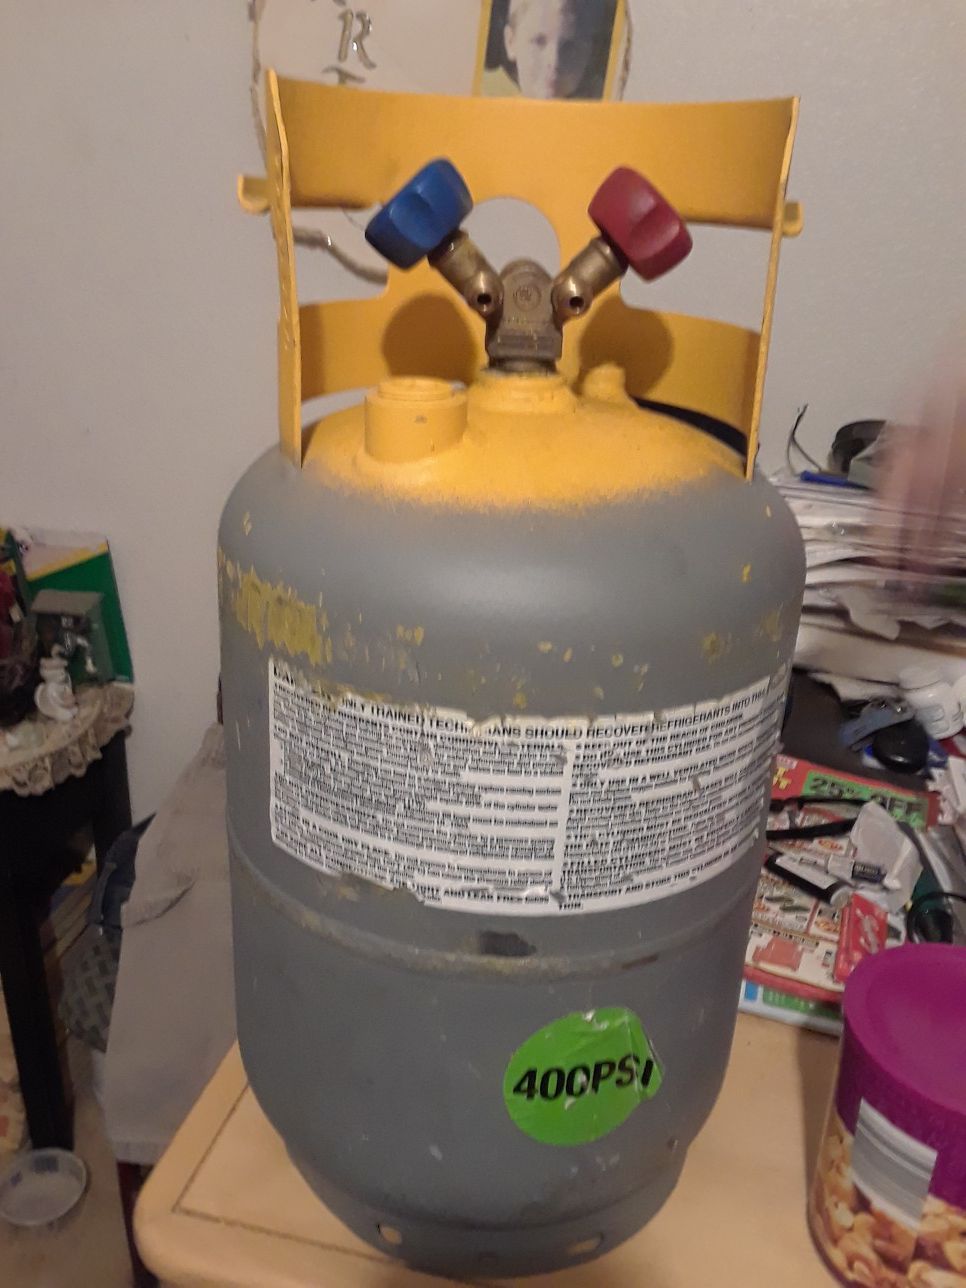 Freon recovery tank 400 PSI capability